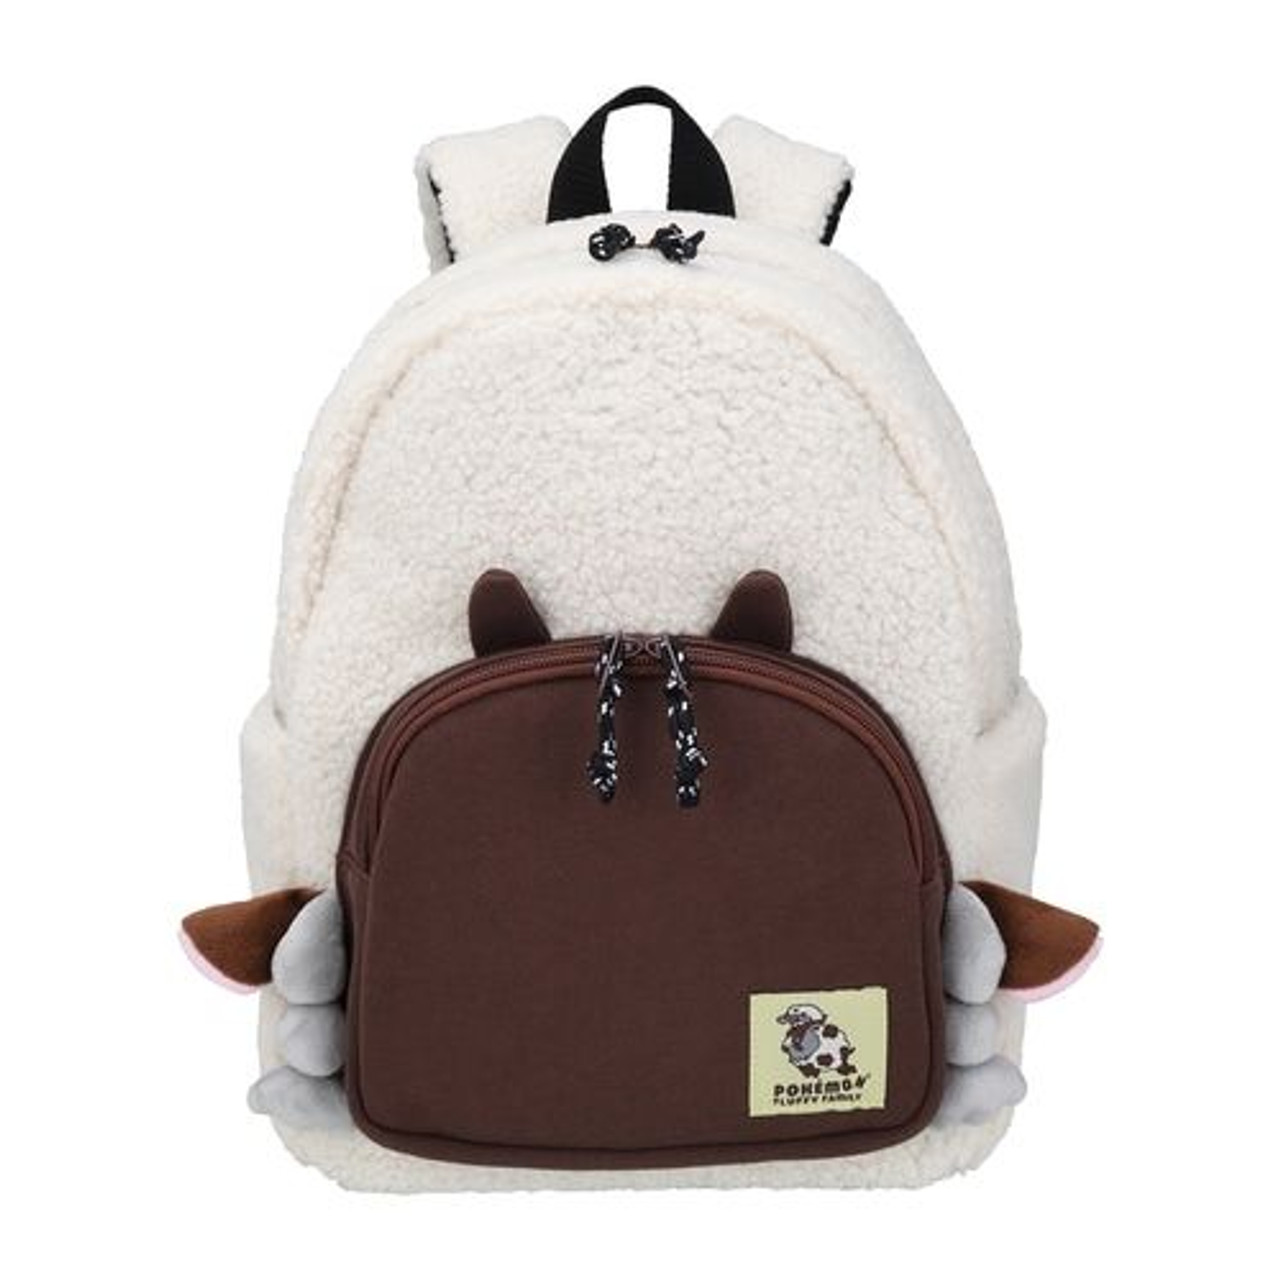 Pokemon gifts: A Wooloo Backpack